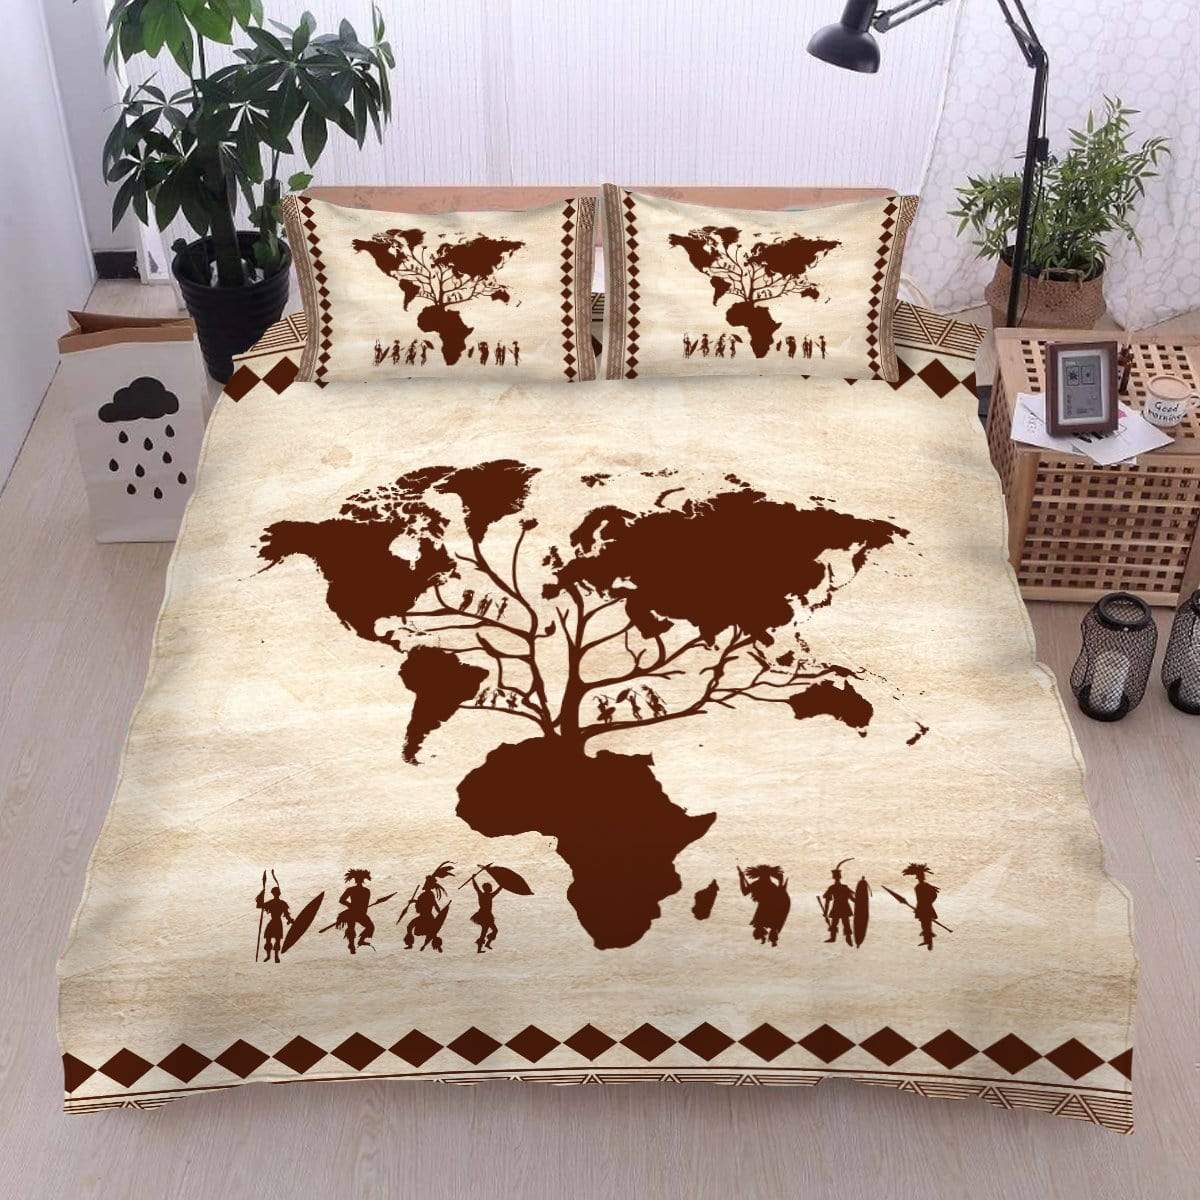 african-roots-bedding-set